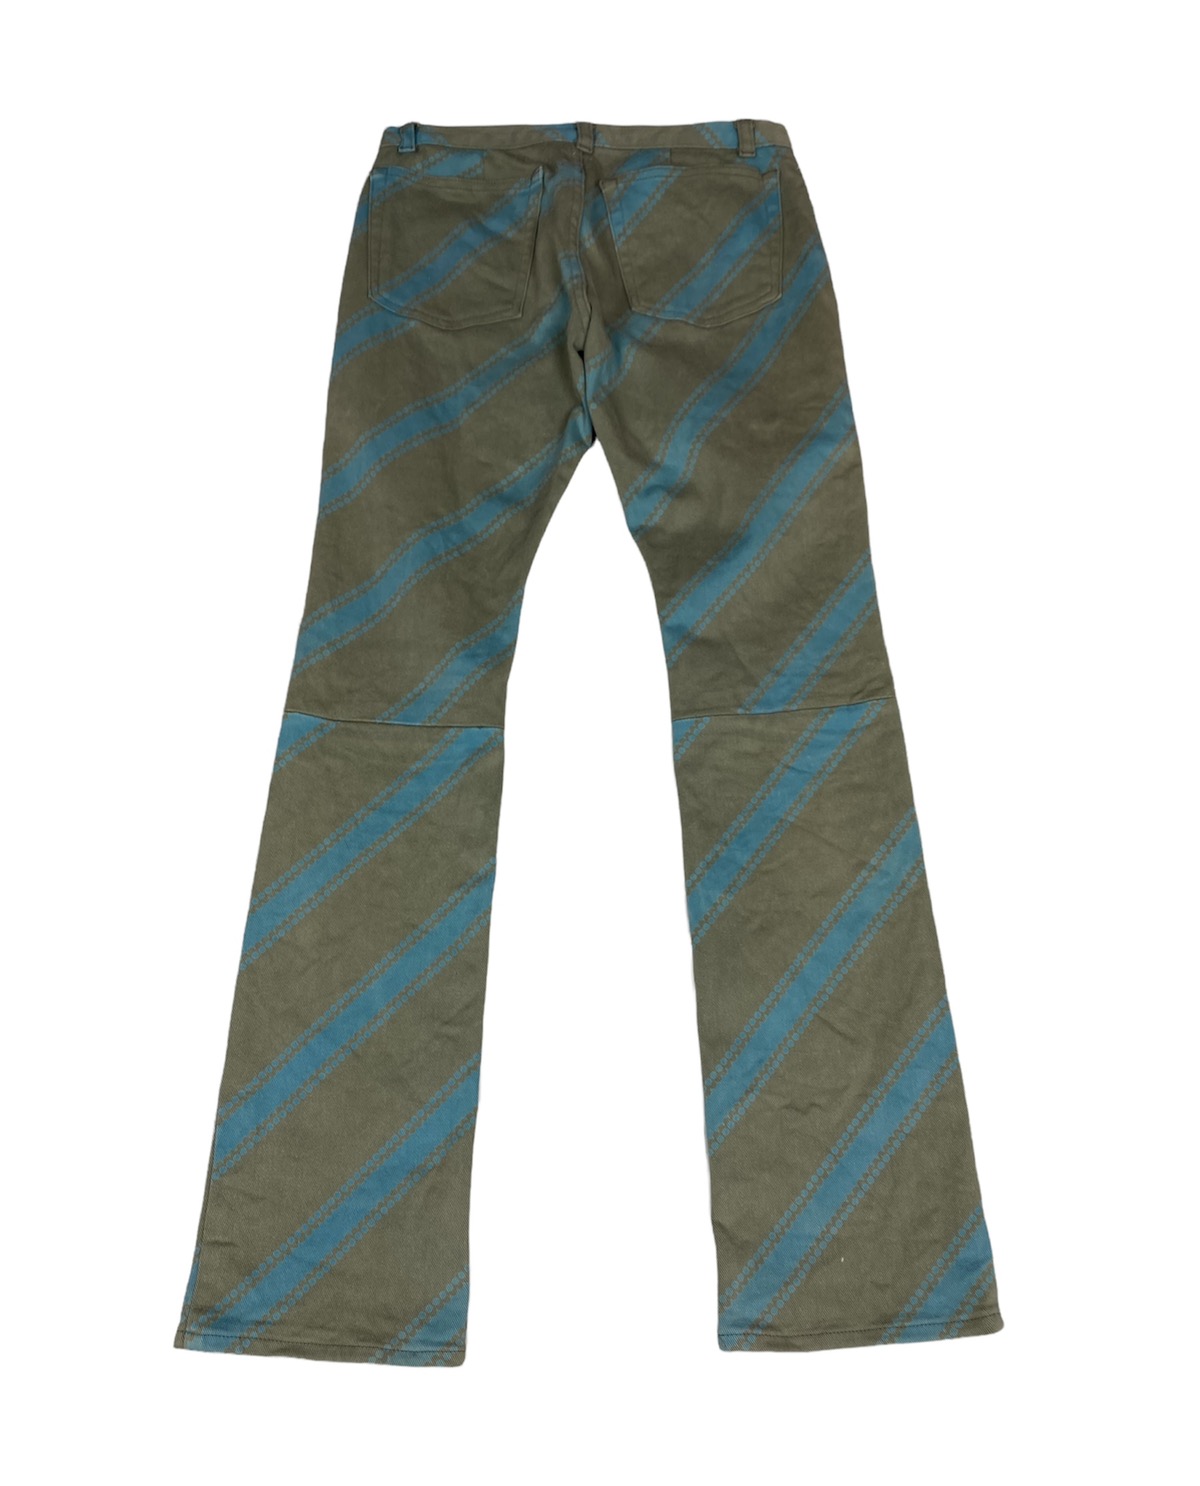 Undercover x Shantii Striped Pants. S026 - 2